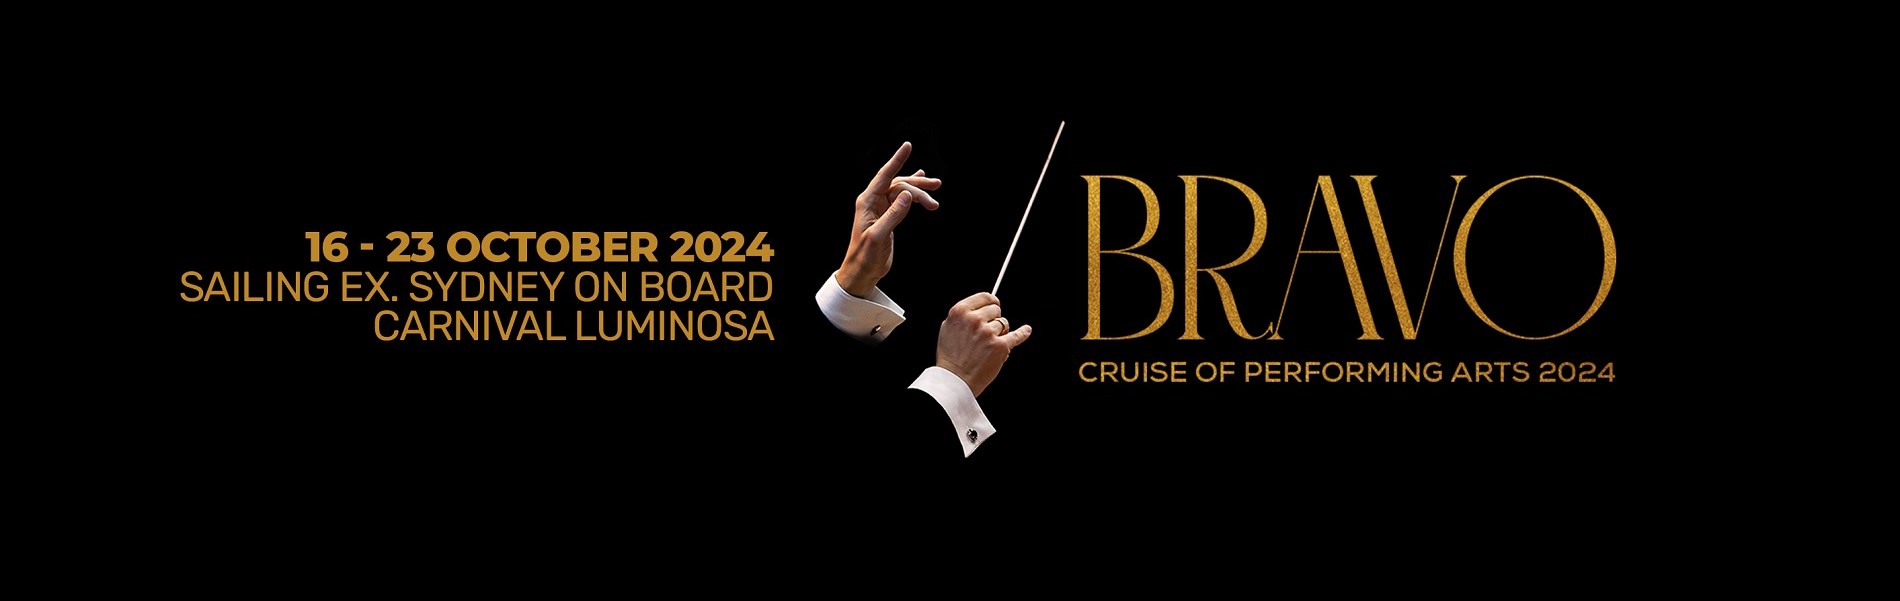 Bravo Cruise of the Performing Arts 2024